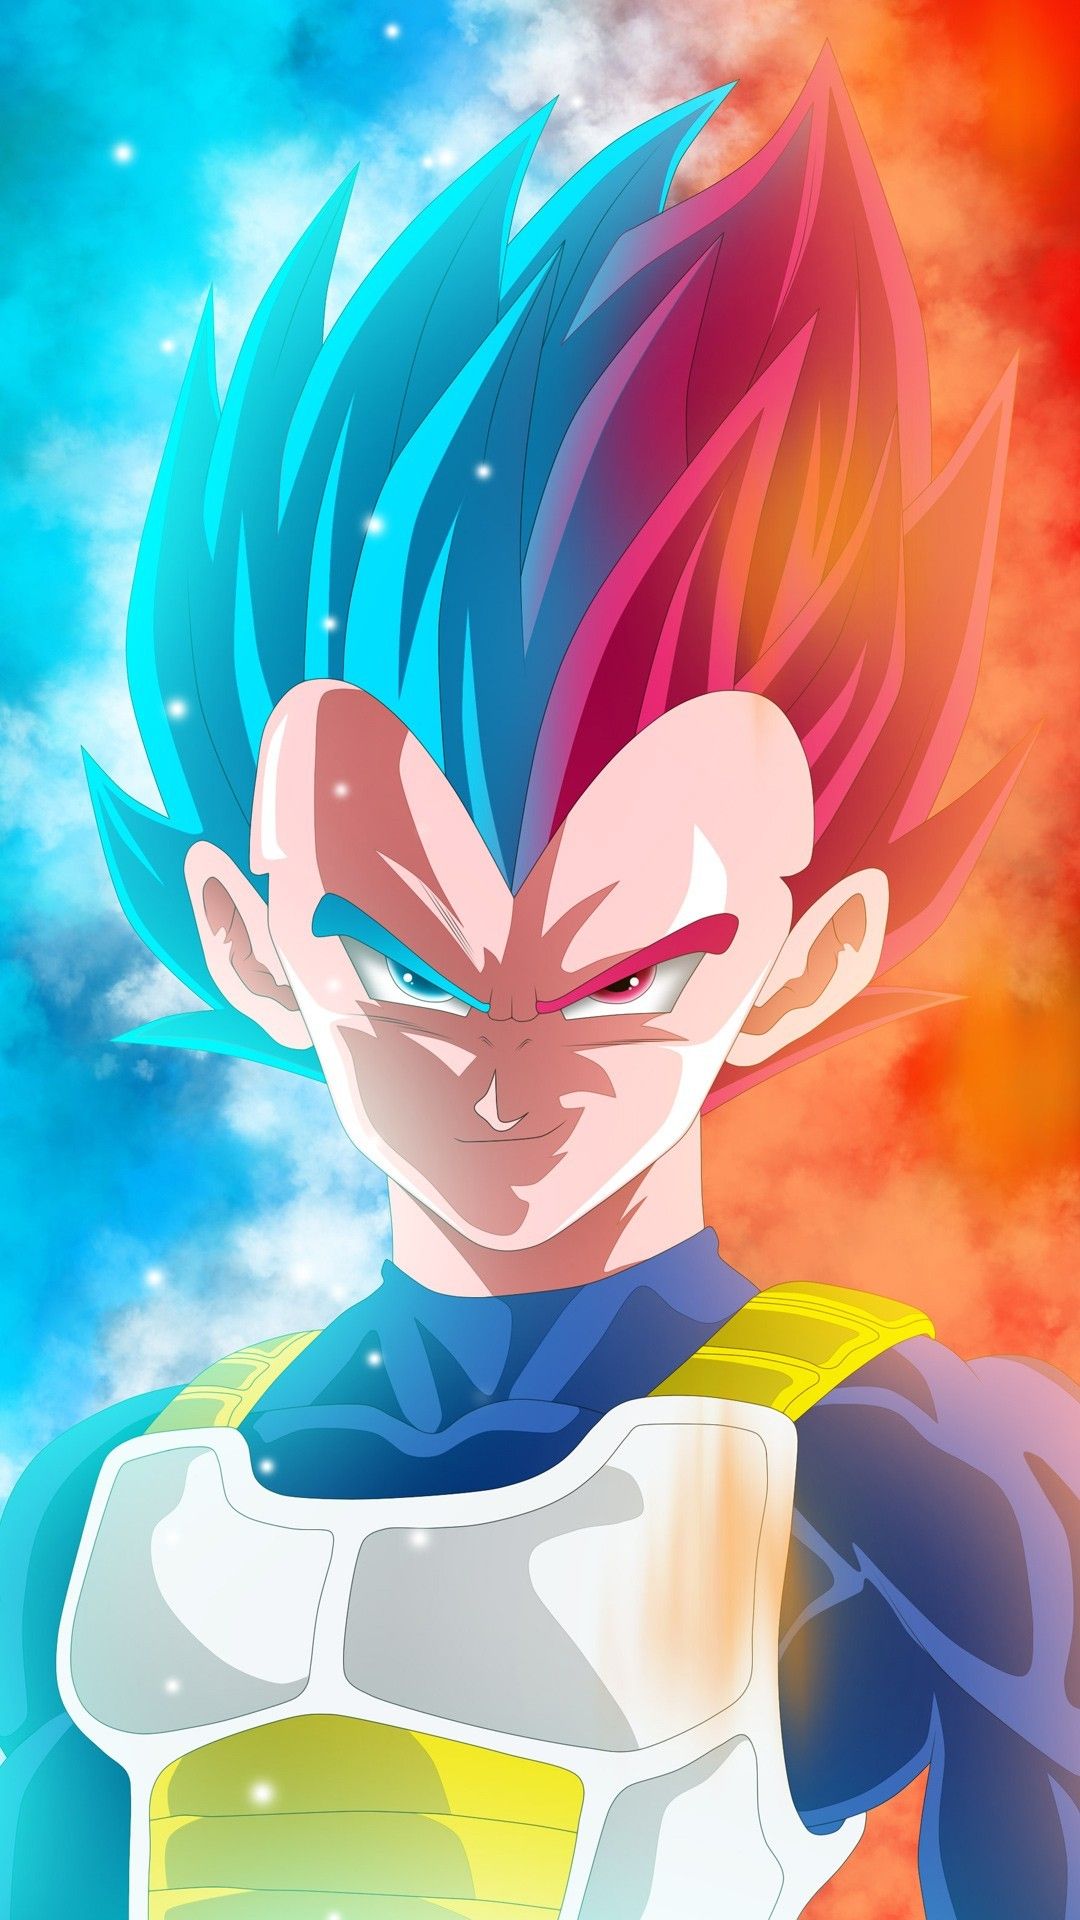 Dragon Ball Z - iPhone Parallax Wallpaper for iPhone 11, Pro Max, X, 8, 7,  6 - Free Download on 3Wallpapers